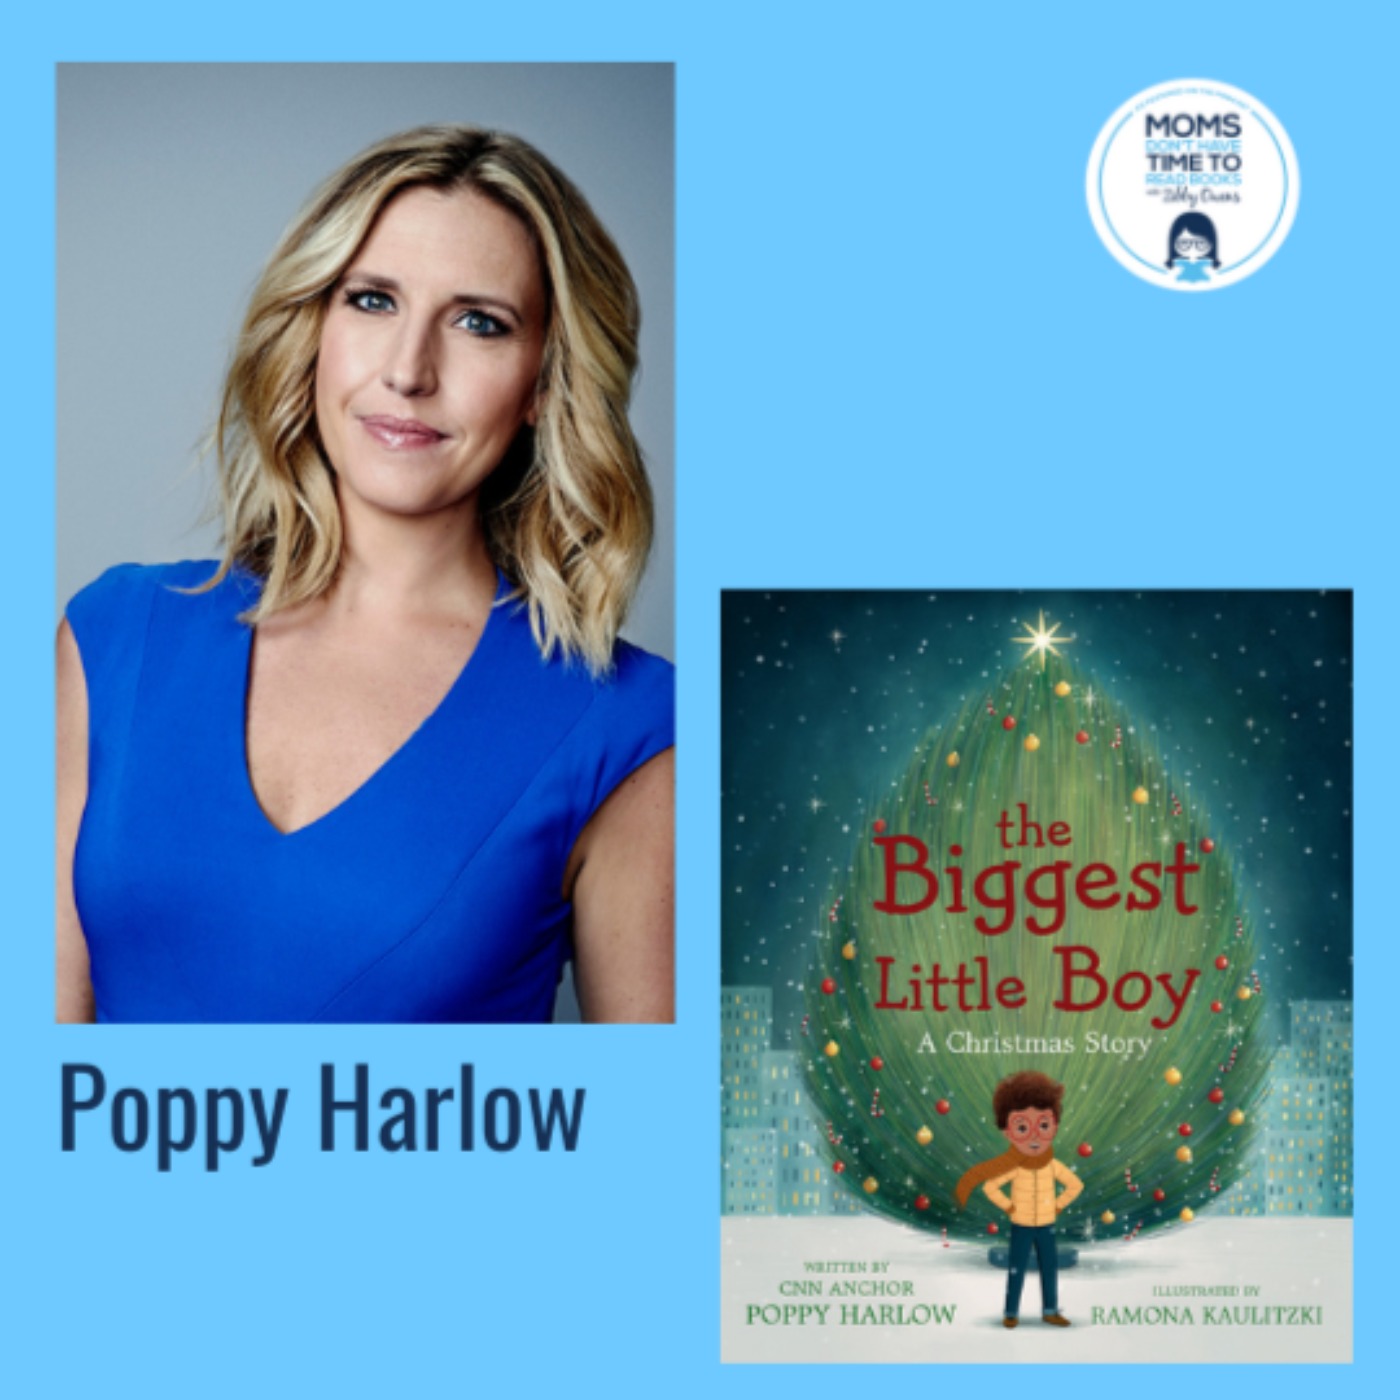 Poppy Harlow, THE BIGGEST LITTLE BOY: A Christmas Story